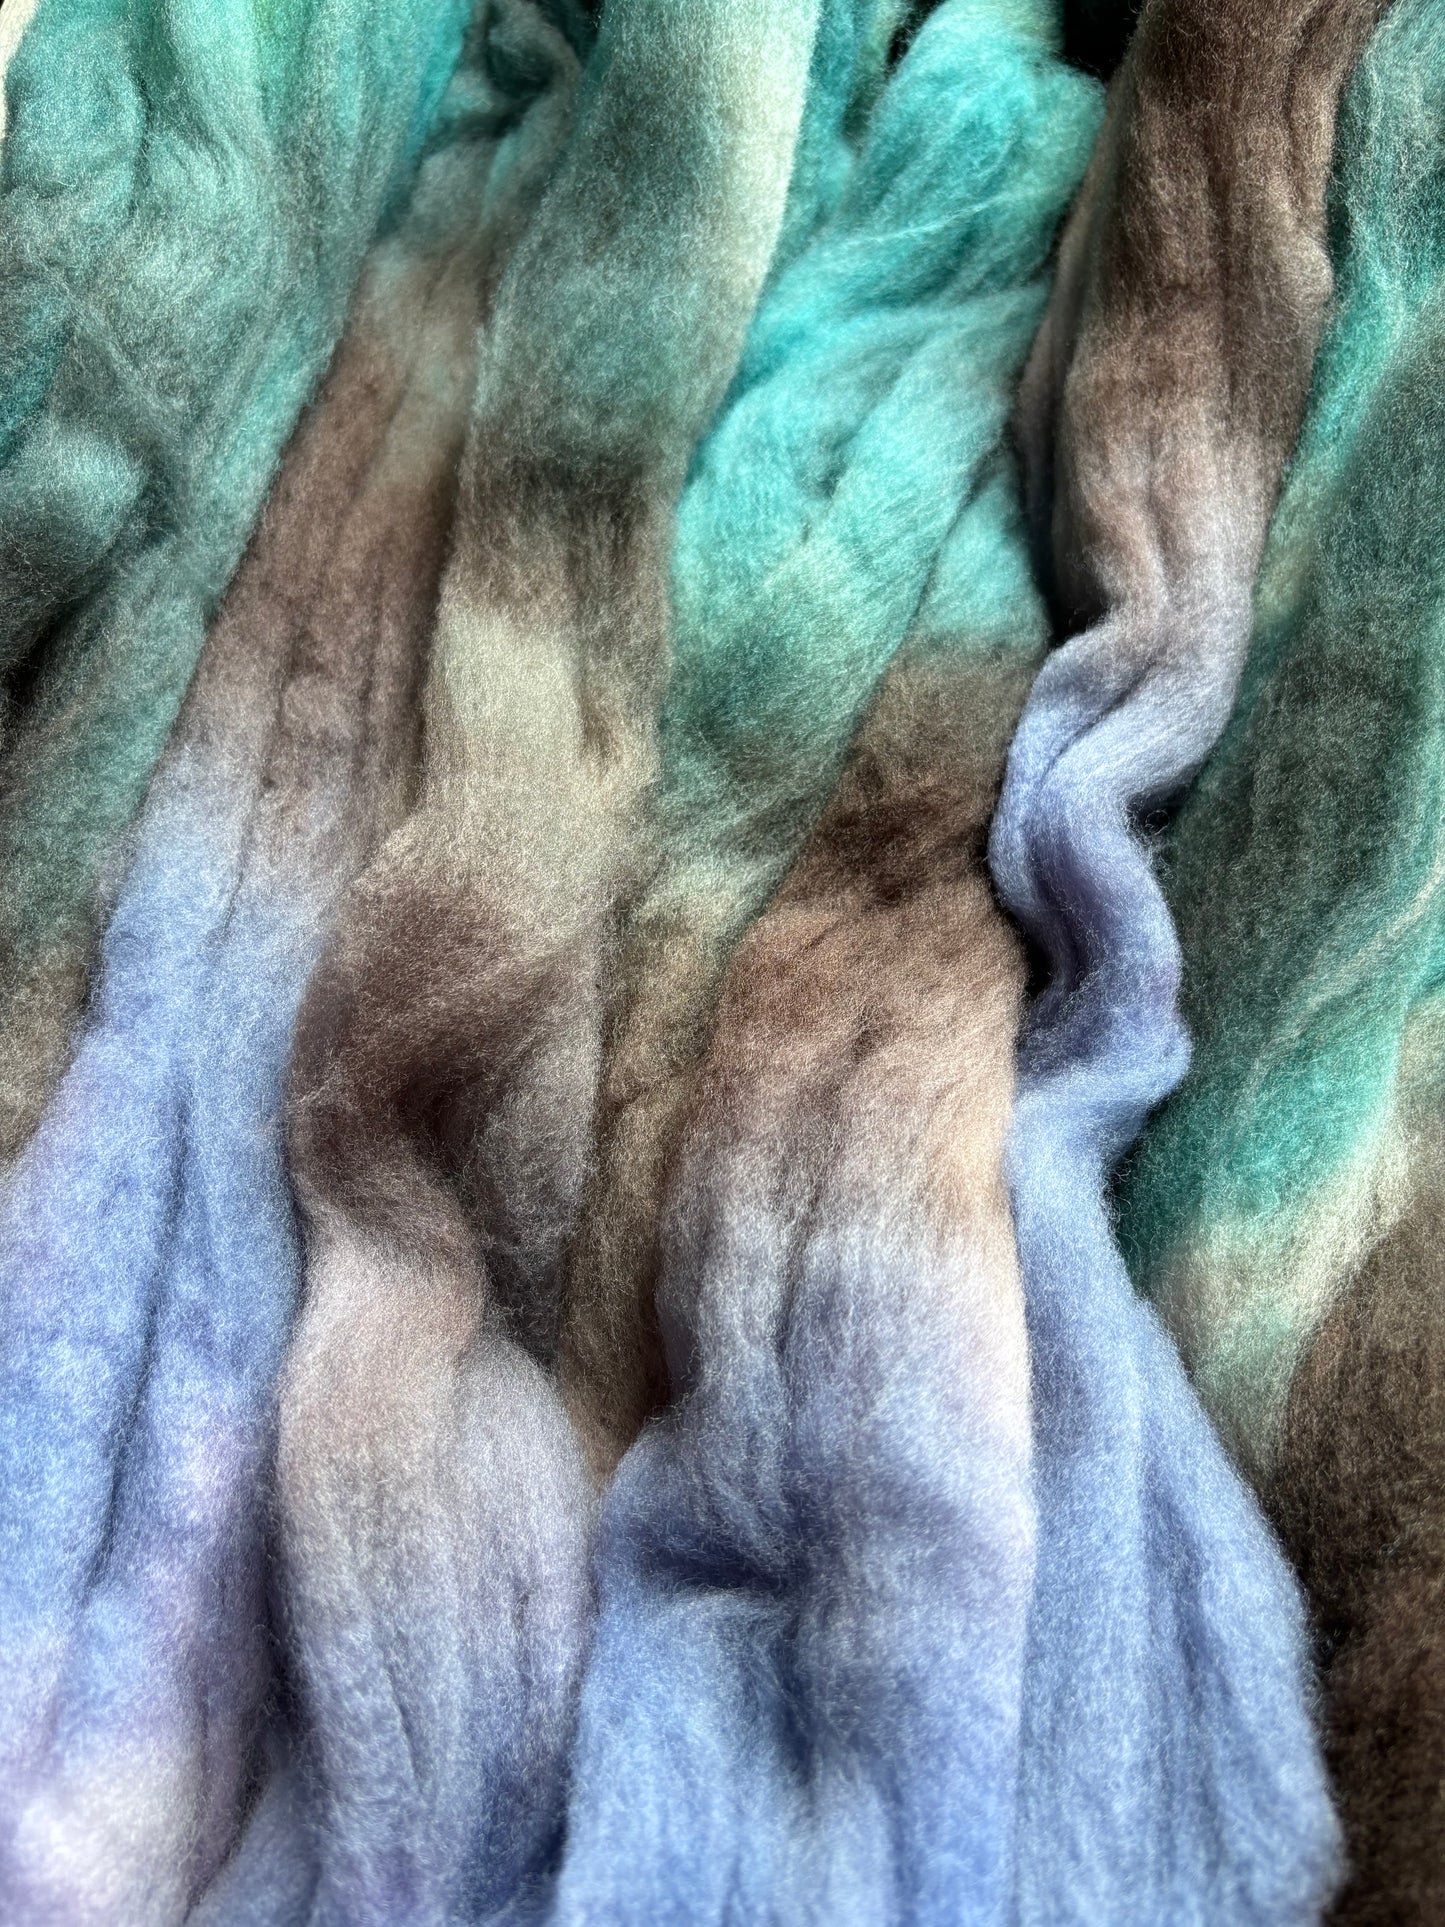 100 grams of Spinning Fibre - 80% Superwash Merino Wool/ 20% Nylon - 22.5 Micron - Hand Dyed Combed Top